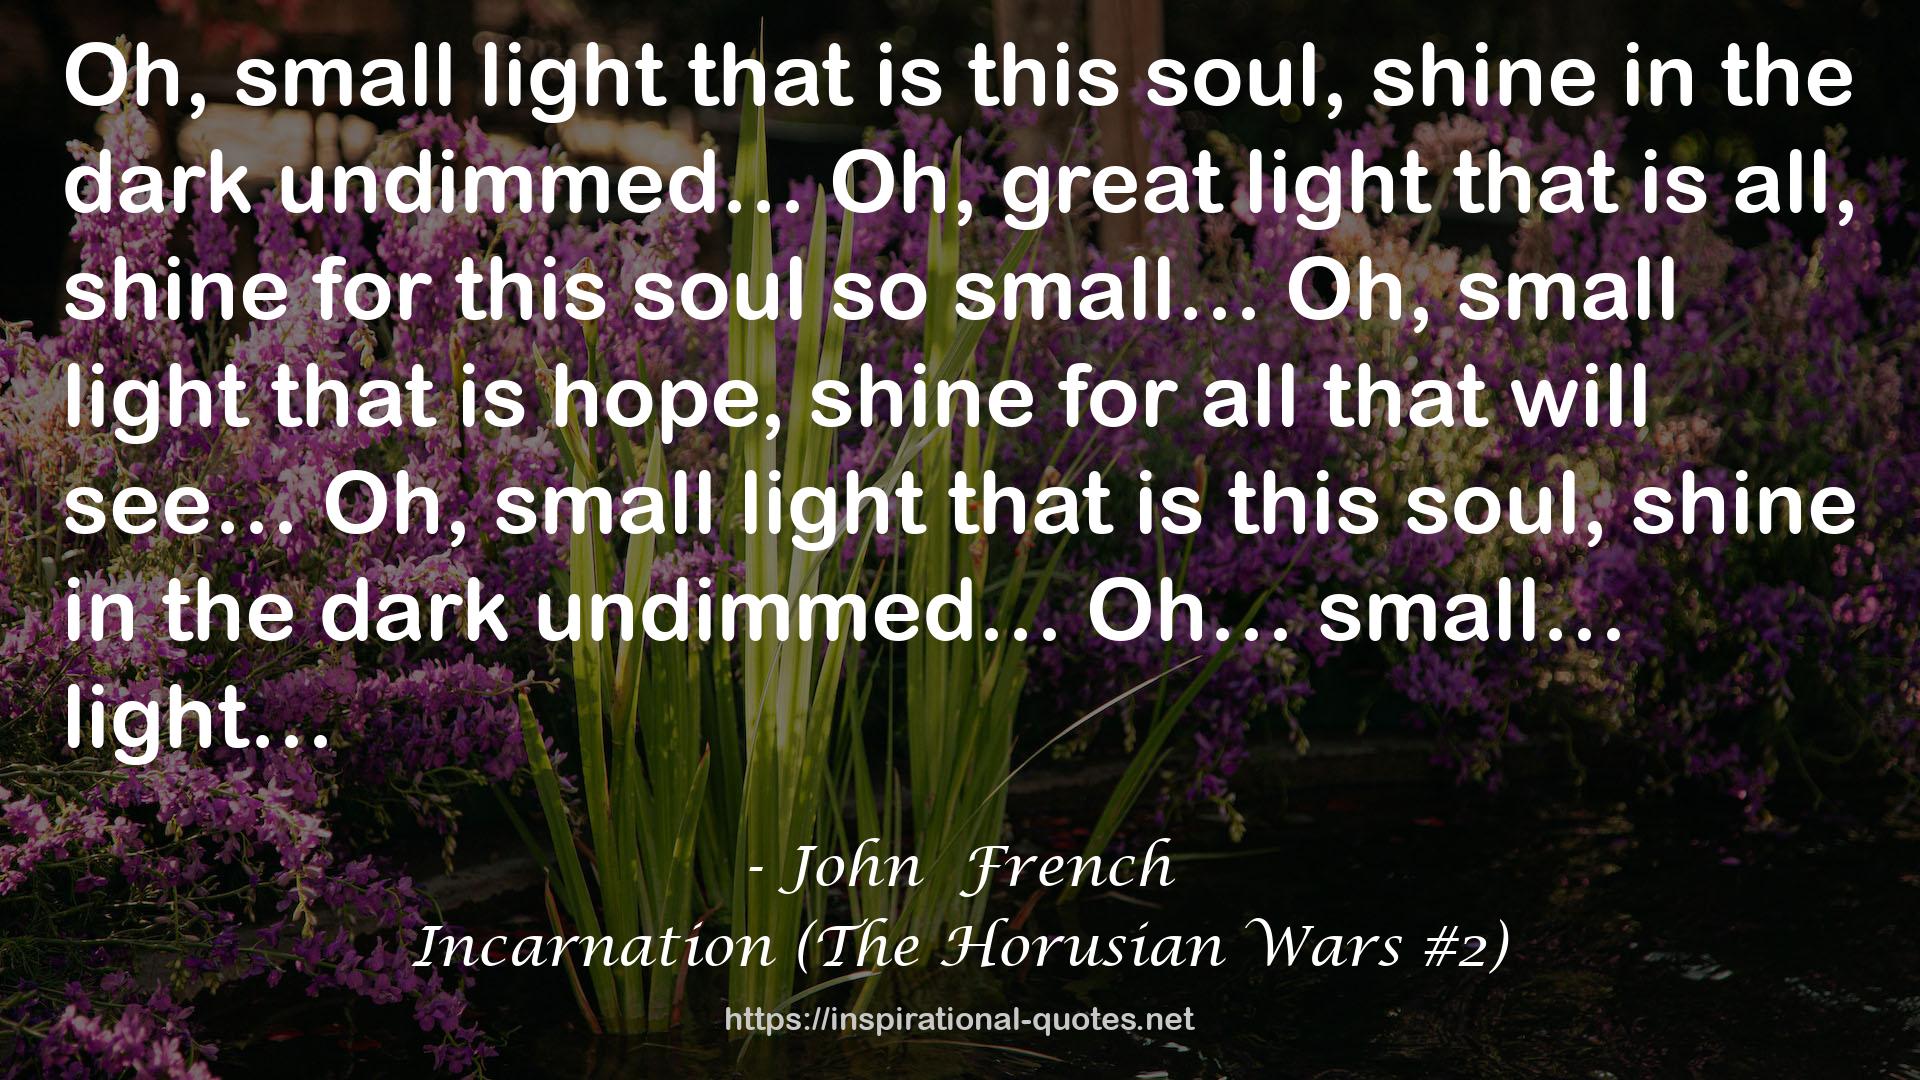 Incarnation (The Horusian Wars #2) QUOTES